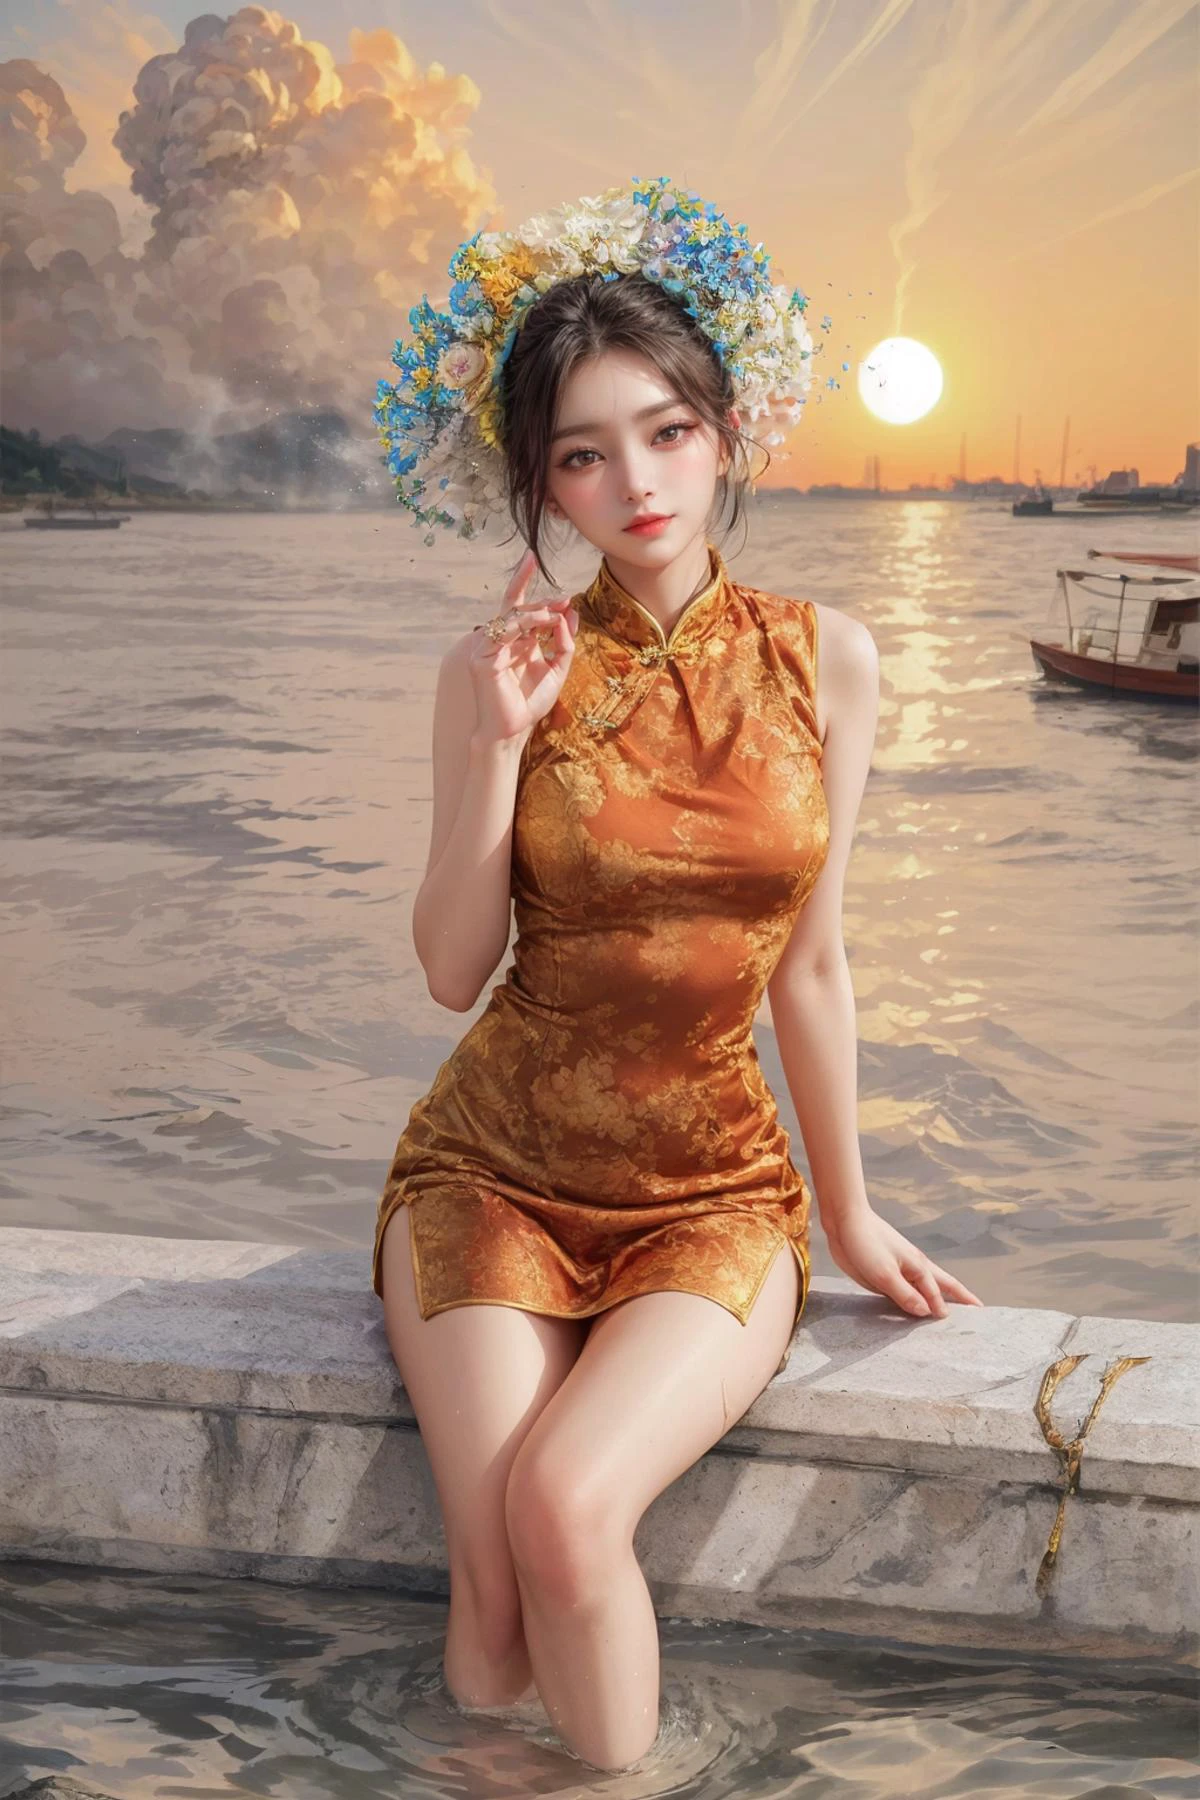 realistic, photorealistic, best quality, masterpiece, ultra high res, finely detailed, quality, realistic lighting, detailed skin, intricate details, raw photo, absurdres, highres, ultra detailed, BREAK, 1girl, solo, looking at viewer, 16 years old, poster, portrait, detailed background, detailed face, (Girl sitting at the harbor, (feet in the water), partially underwater shot, feet submerged in water, fish in the water, ocean, morning, sunrise background, bright blue sky and sunlight, windy day, nice hands:1.4), (xunpu, chinese clothes, red dress, flower print, hair flower, sexy:1.5), large breasts, (skinny, slim_legs, model pose:1.3), (smile, blush, Pink lips, Glowing red Eyes, perfect face, detailed pupils, Makeup:1.1), reflection, (refraction:1.4), (Rembrandt lighting:1.3), (dark studio, rim lighting, two tone lighting, dimly lit, low key), (lens flare, light particle, lens glare:1.3), (watercolor style, soft blending, dreamy washes, delicate textures, brilliant colors, action painting, gestural marks, dynamic brushwork, expressive motion, spontaneous technique, abstract expressionism, energetic compositions, action pose, vibrant glow, dynamic colors, reflective surfaces, girly style, delicate accessories, Overdetailed art, Water color painting:1.1), (Clouds, Serenity:1.2), (explosive light and shadow:1.3), (hand of Guido Daniele:1.5), (sexy, slim, light particles, wallpaper, chromatic aberration:1.2), (beautiful view, misty atmosphere, solitary:1.4), (atmosphere, Cosy:1.2), (depth of field:1.4), (ornaments detailed, flying splashes, flying petals, bloom, bloom effect, water reflection:1.3), (long legs:1.3), (Glowing ambiance, enchanting radiance, luminous lighting, ethereal atmosphere, mesmerizing glow, evocative hues, captivating coloration, enchanting aura, melanchonic soft light:1.4), (outdoors, landscape, breeze, ethereal, scenery, nature, wind:1.2),  (colorful refraction, iridescent colors, Iridescence:1.2), (Luminescent Particles:1.3), half body, (eye focus,  face focus, character focus, close-up face:1.3), (dynamic pose, dynamic angle, dutch angle,  cowboy shot:1.4), official art, beautiful and aesthetic, beautiful, (zentangle, mandala, tangle, entangle), (ecstasy of flower:1.2), the most beautiful form of chaos, elegant, a brutalist designed, vivid colours, romanticism, atmospheric, warm tone, soft light, (narrow waist:1.4), (fractal art), floating particles, particles, BREAK, loop lighting, equirectangular 360, Gel lighting, film grain, film, delicate, anime key visual, Ultrarealistic, Peaceful, Hopeful, rim light, Detailed illustration, Lens Flare, short lighting, layered textures, sketch, moody lighting, extremely detailed CG Unity 8k wallpaper, dramatic lighting, specular lighting, cinematic, dramatic, broad lighting, Circular polarizer, drawing, close up, key visual, PBR Texturing, Anisotropic Filtering,  Albedo And Specular Maps, Multi-Layered Textures, Surface Shading, Sub-Pixel Convolution, Accurate Simulation Of Light-Material Interaction, blurry foreground, volumetric light effect, volumetric lighting, Tone Mapping, Lumen Reflections, Global illumination, Ray Tracing, Screen Space Global Illumination, Accent Lighting, volumetric, Rule of thirds, high dynamic range, Multi-exposure HDR capture, atmospheric perspective, aerial perspective, dynamic lighting, atmospheric depth, huge filesize, 8k uhd, analog, specular highlights, atmospheric lighting, sharp focus, perspective, ambient occlusion, subsurface scattering, photon mapping, octane render, unreal engine 5, radiosity, sharp, diffuse lighting, high resolution scan, professionally color graded, automatic white balance, BREAK, 